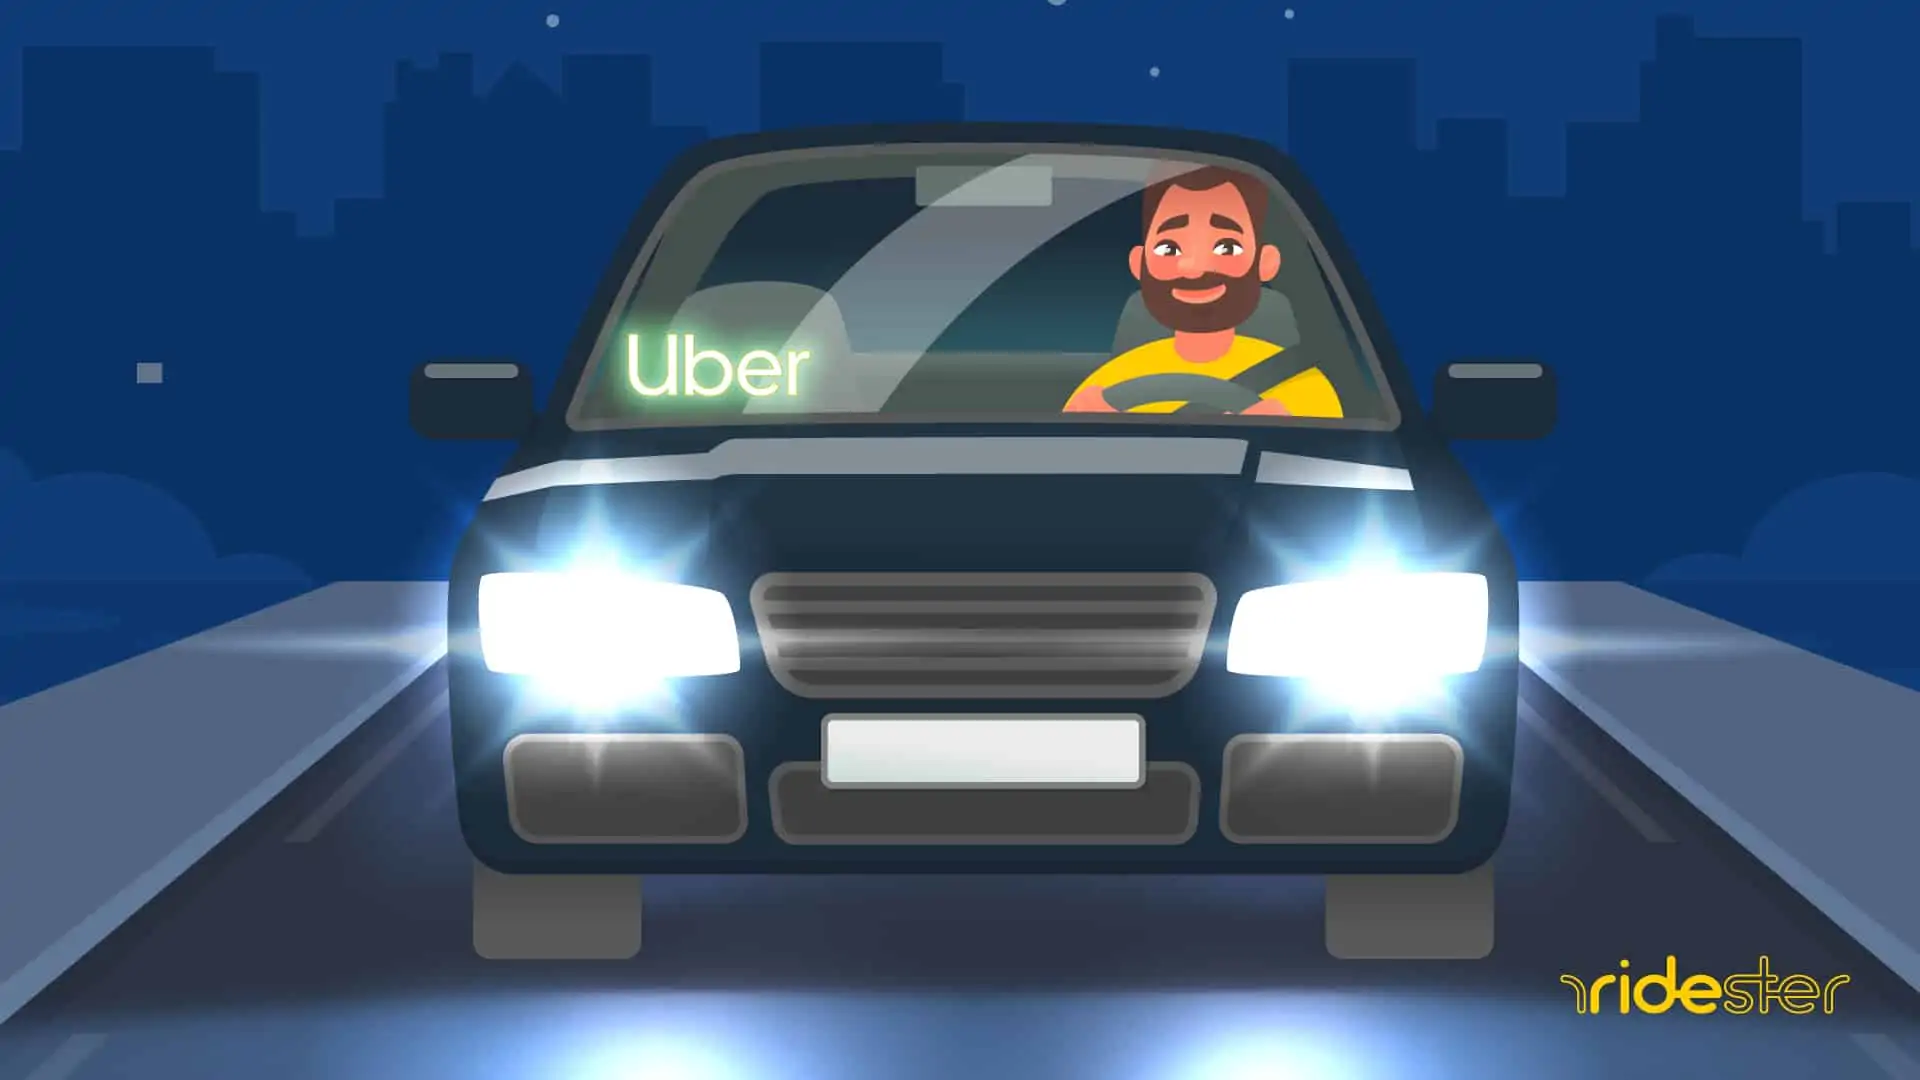 vector graphic showing uber light in windshield of car driving down road